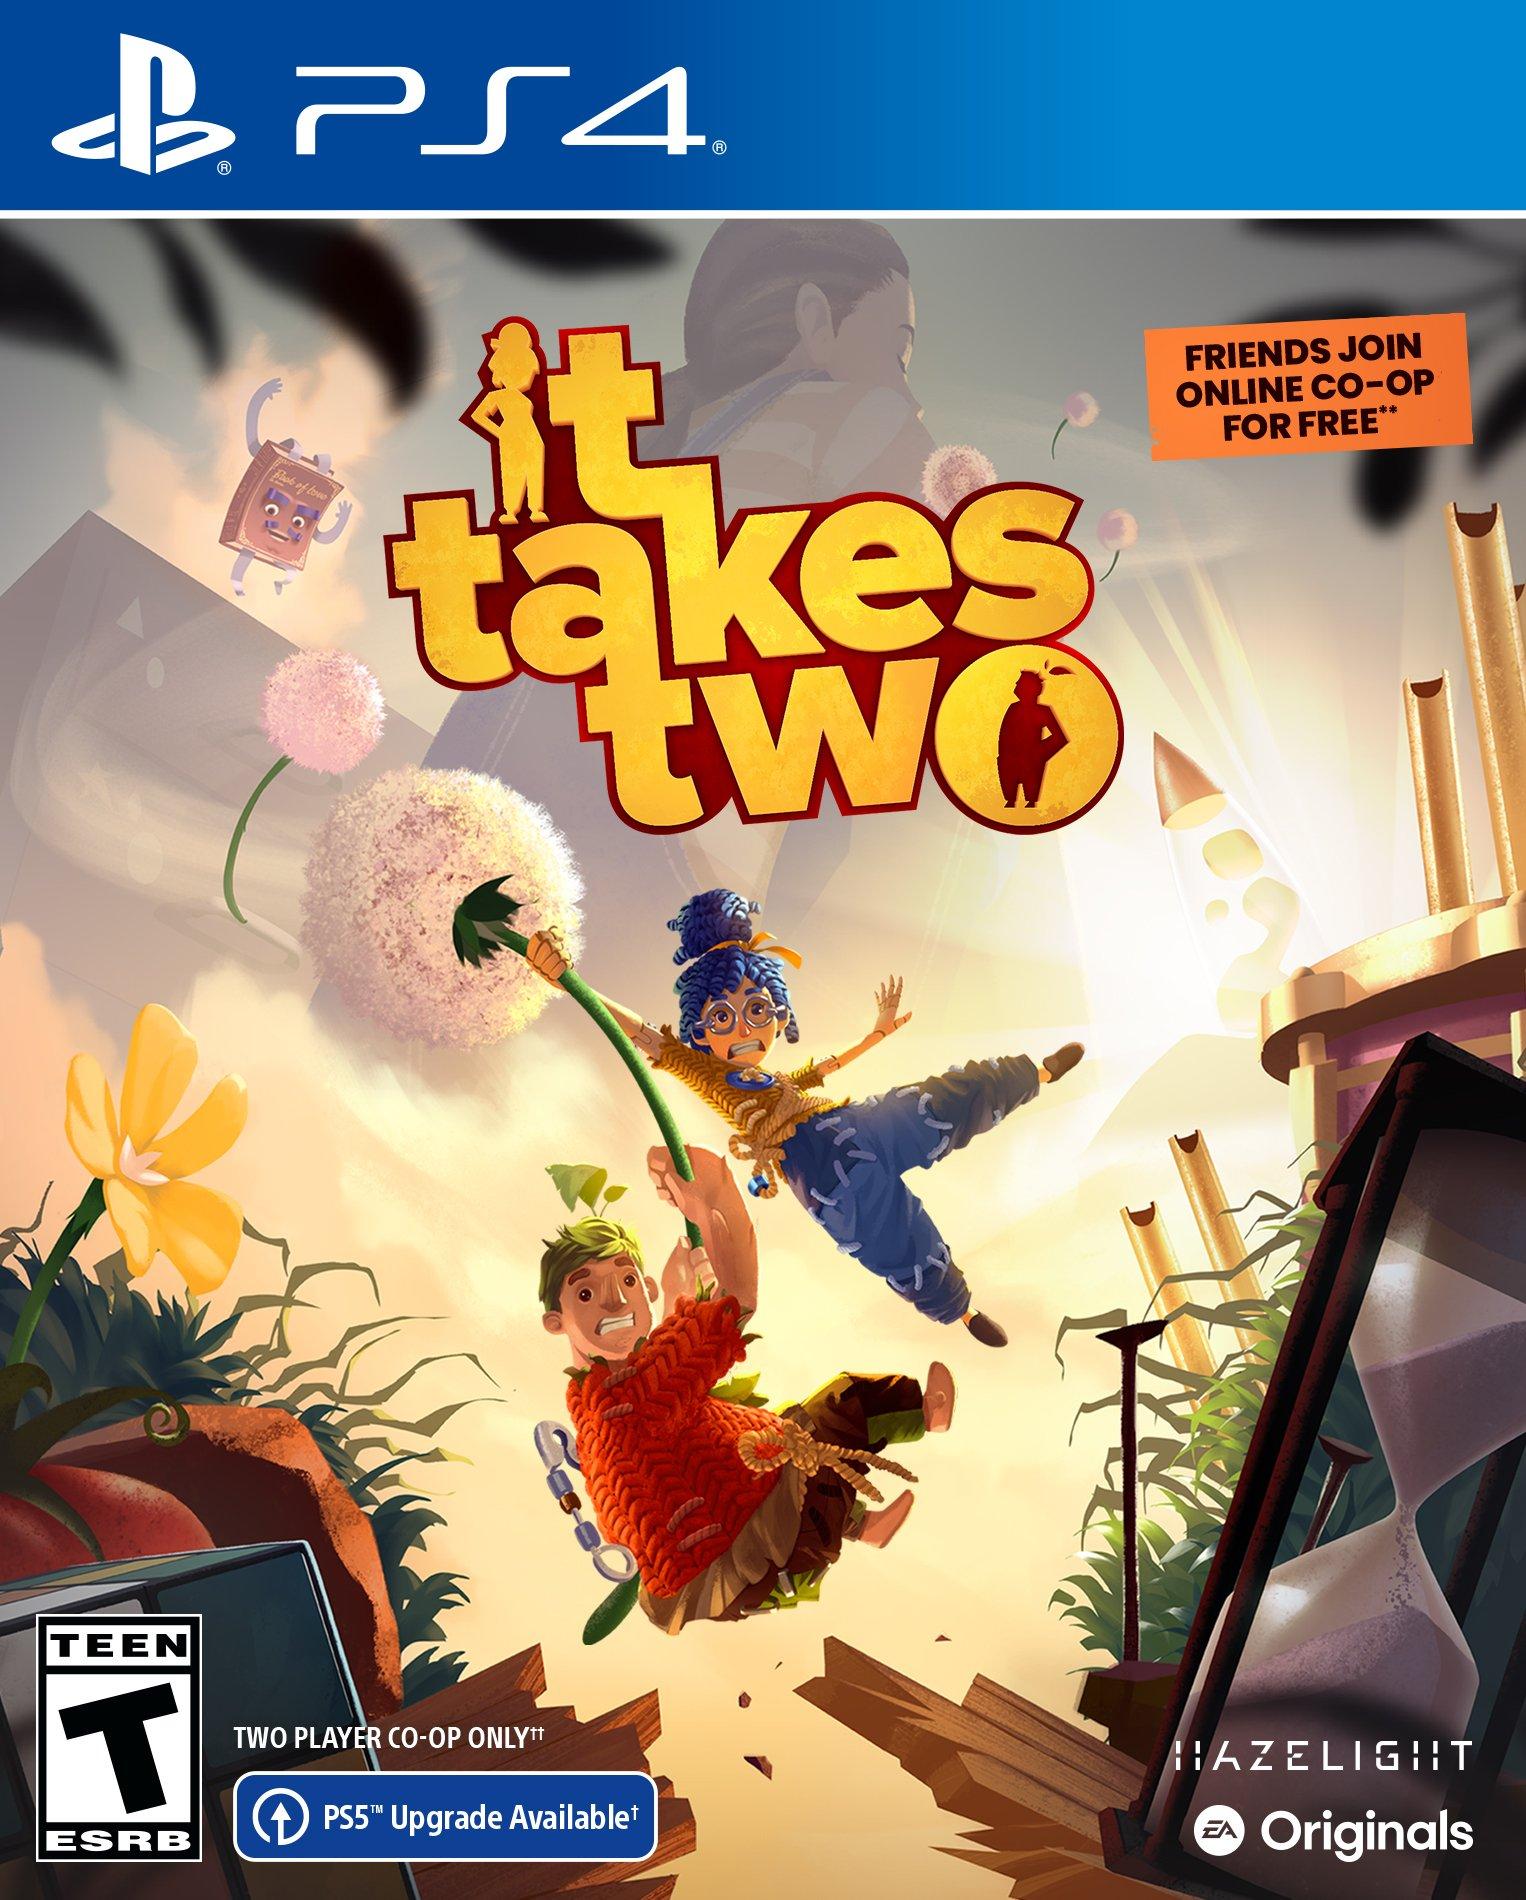 It Takes Two - PlayStation 4 | PlayStation 4 | GameStop